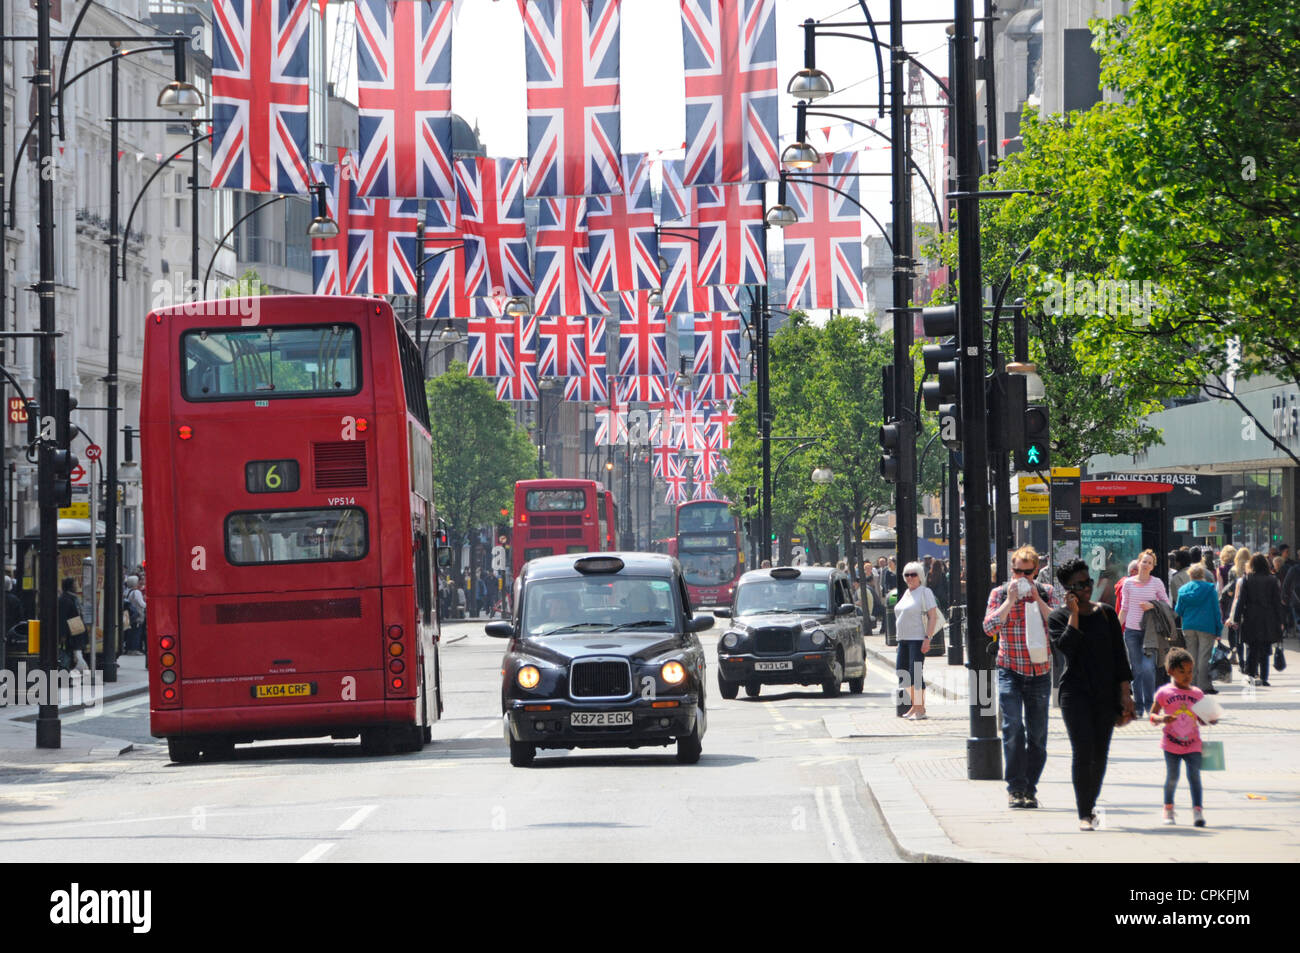 Retail shopping street Red London double decker bus and black taxi cab in Oxford Street scene with Jubilee & 2012 Olympics Union Jack flags England UK Stock Photo